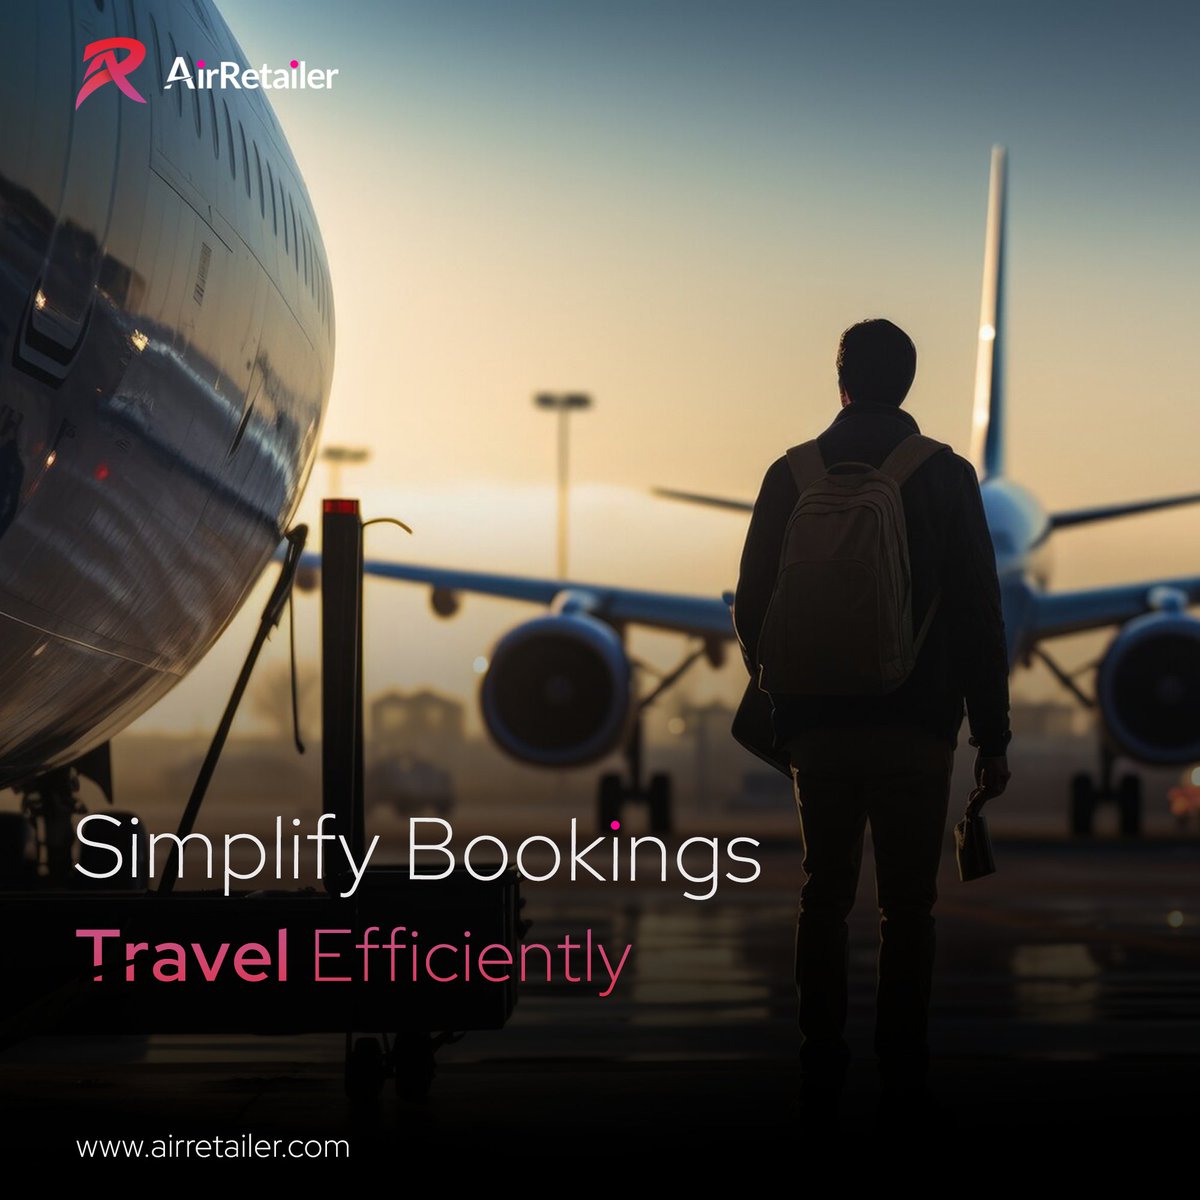 AirRetailer offers a user-friendly user interface that eases the booking process.
#airretailer #corporatetravel #businesstravel #travelsoftware #businesstrip  #corporatetraveltool #flightcorporatebooking